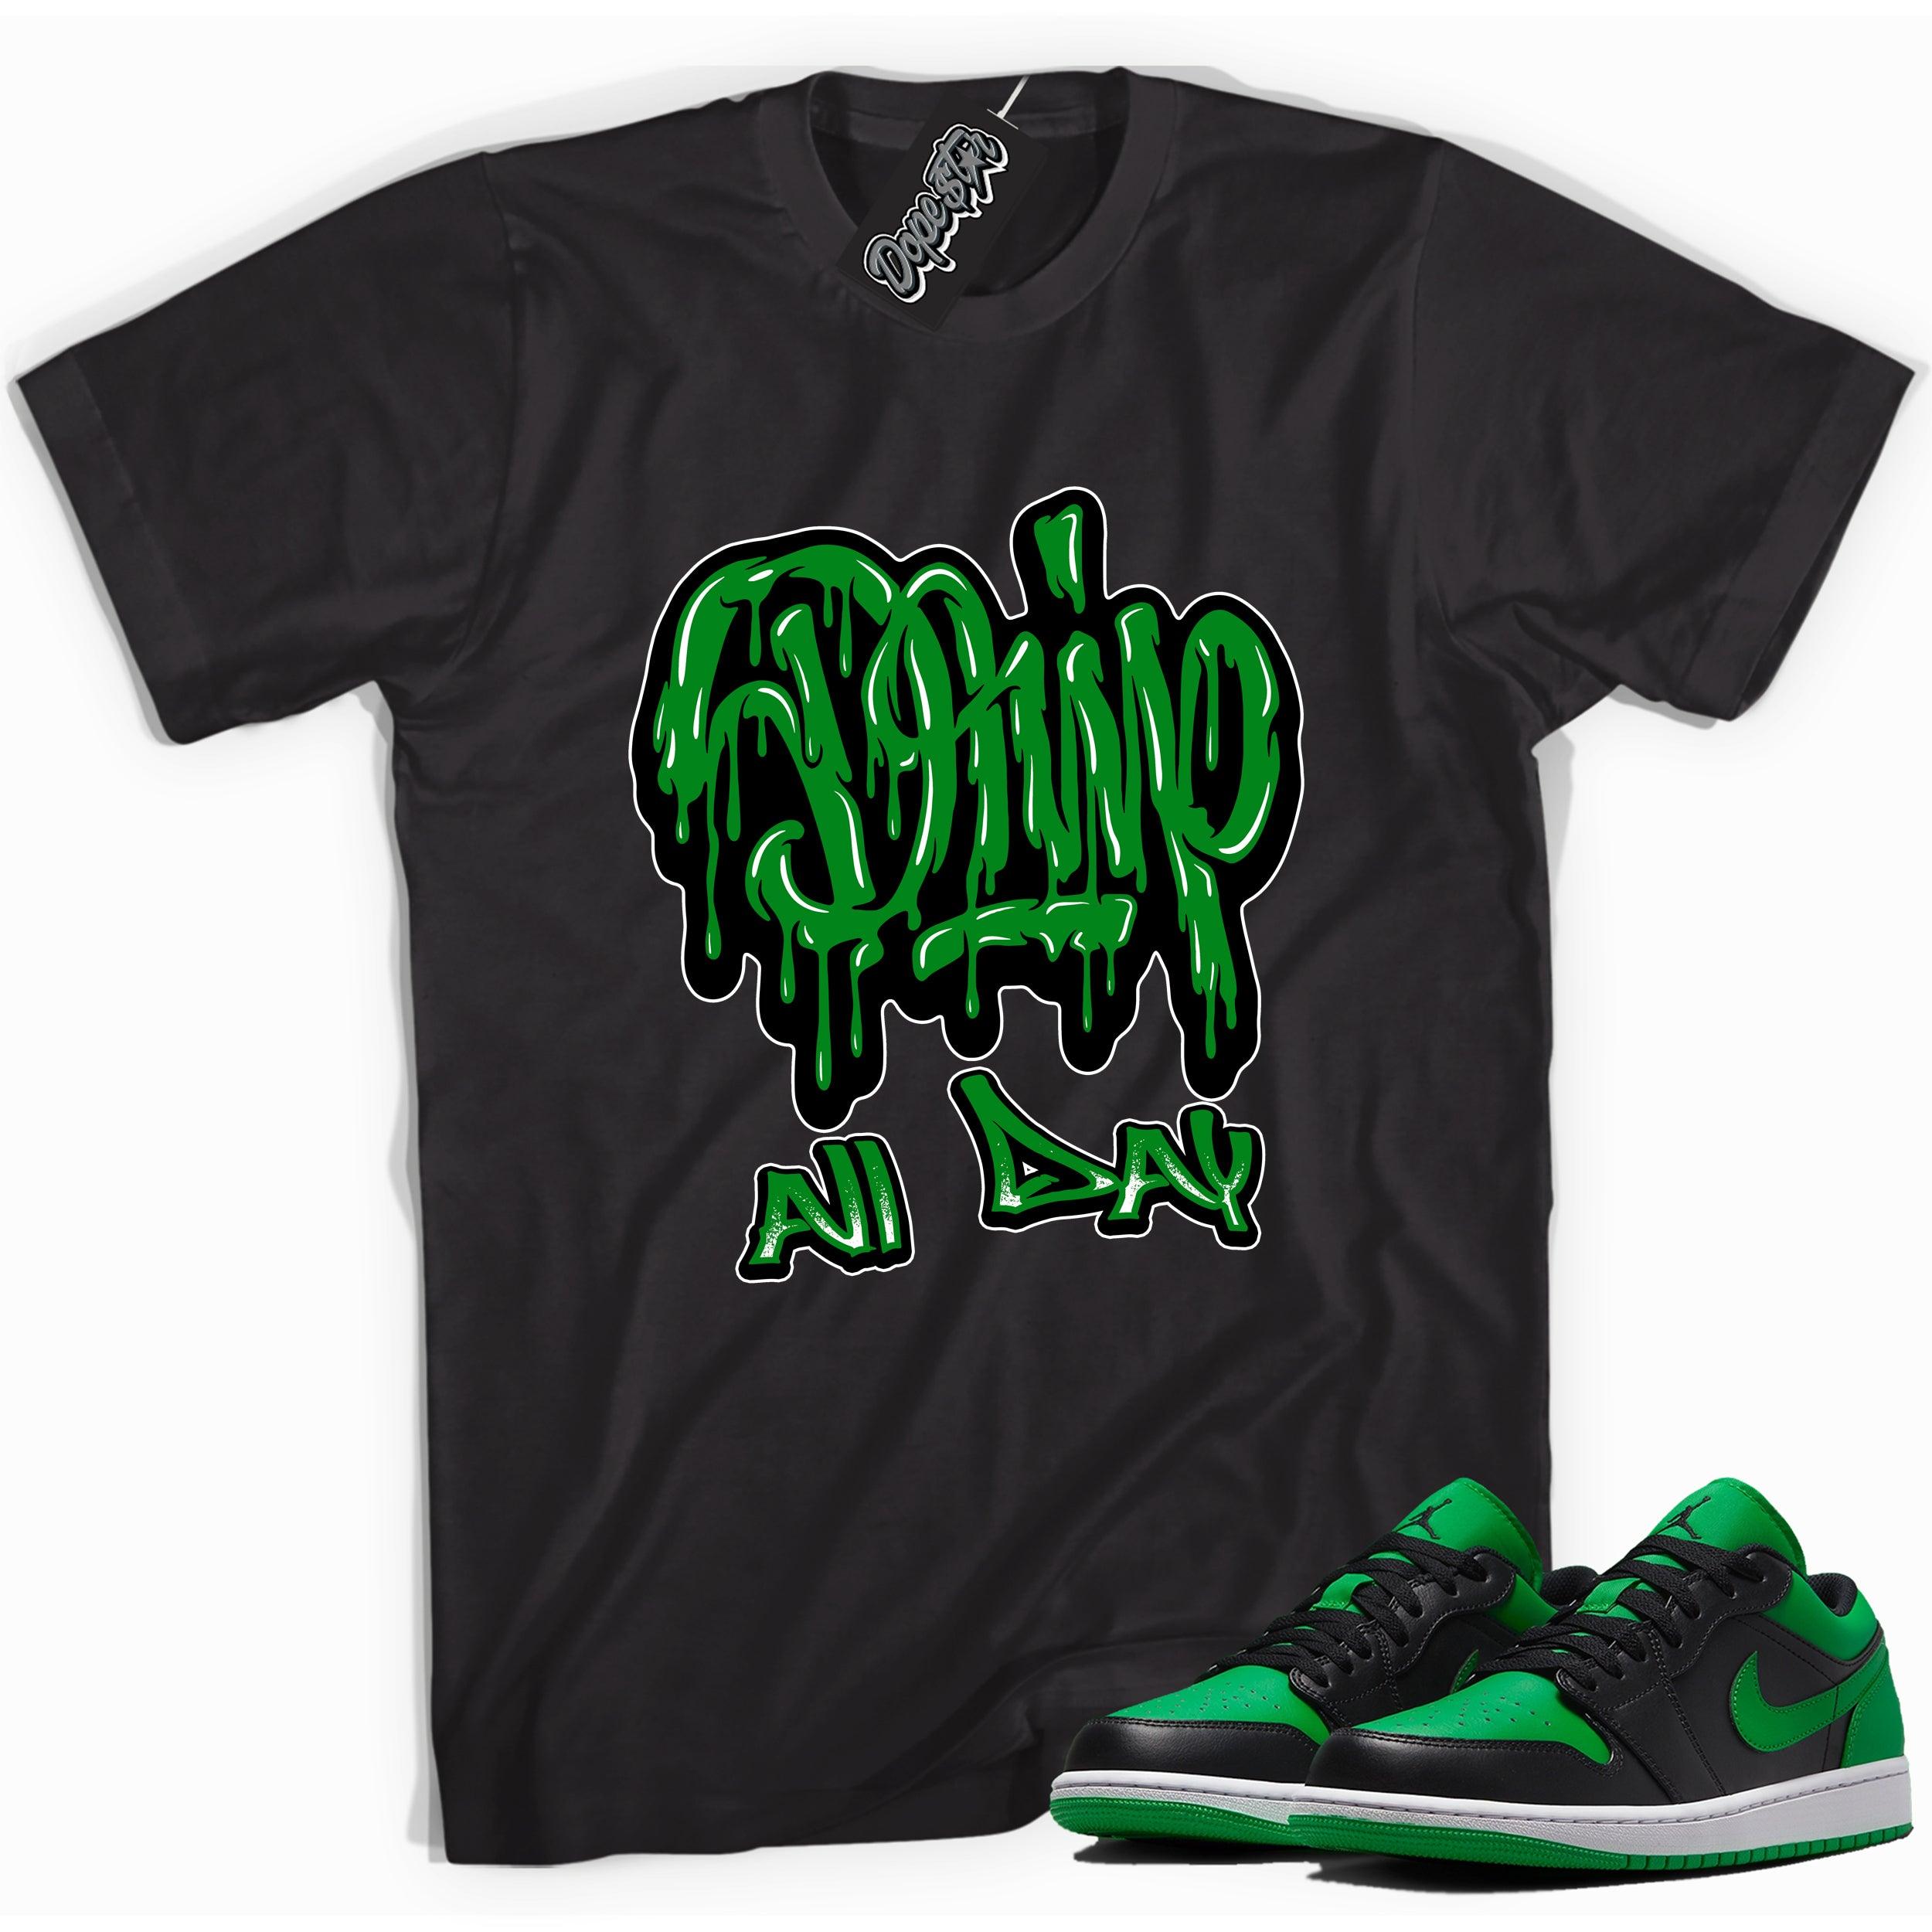 Cool black graphic tee with 'Drip All Day' print, that perfectly matches Air Jordan 1 Low Lucky Green sneakers